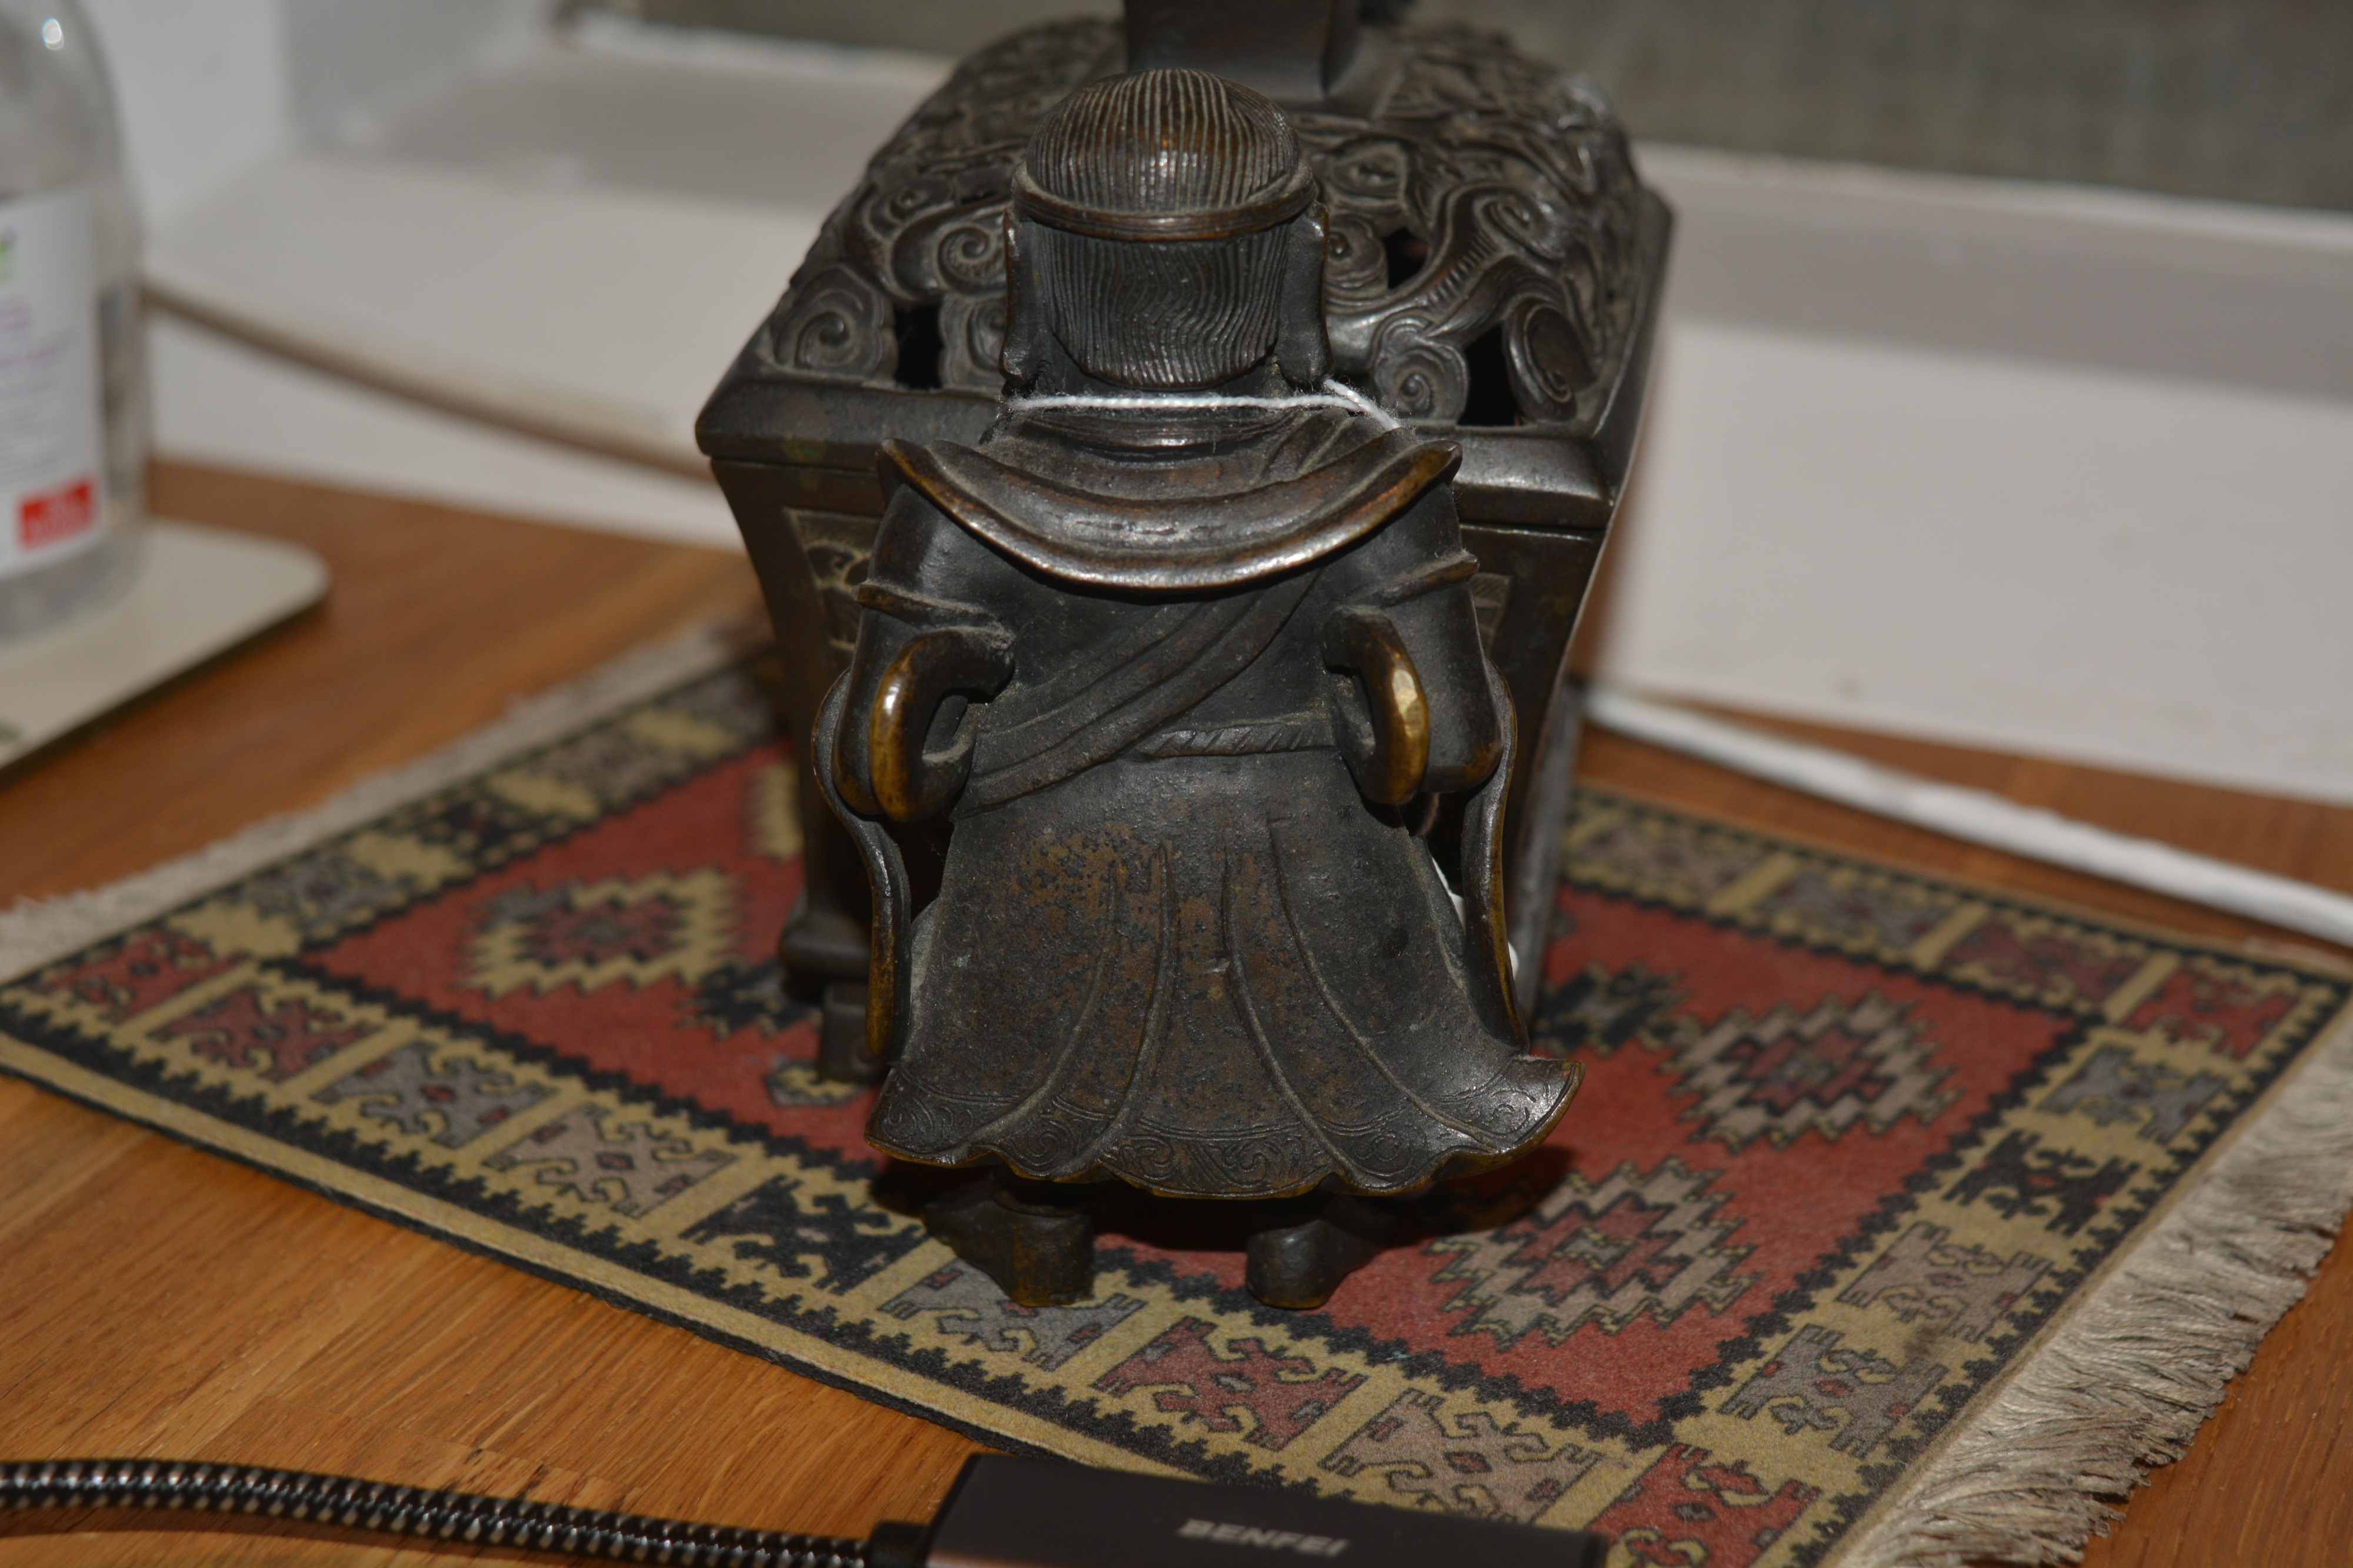 Bronze censer Chinese, 18th/19th Century in the form of a central rectangular casket with a - Image 11 of 23